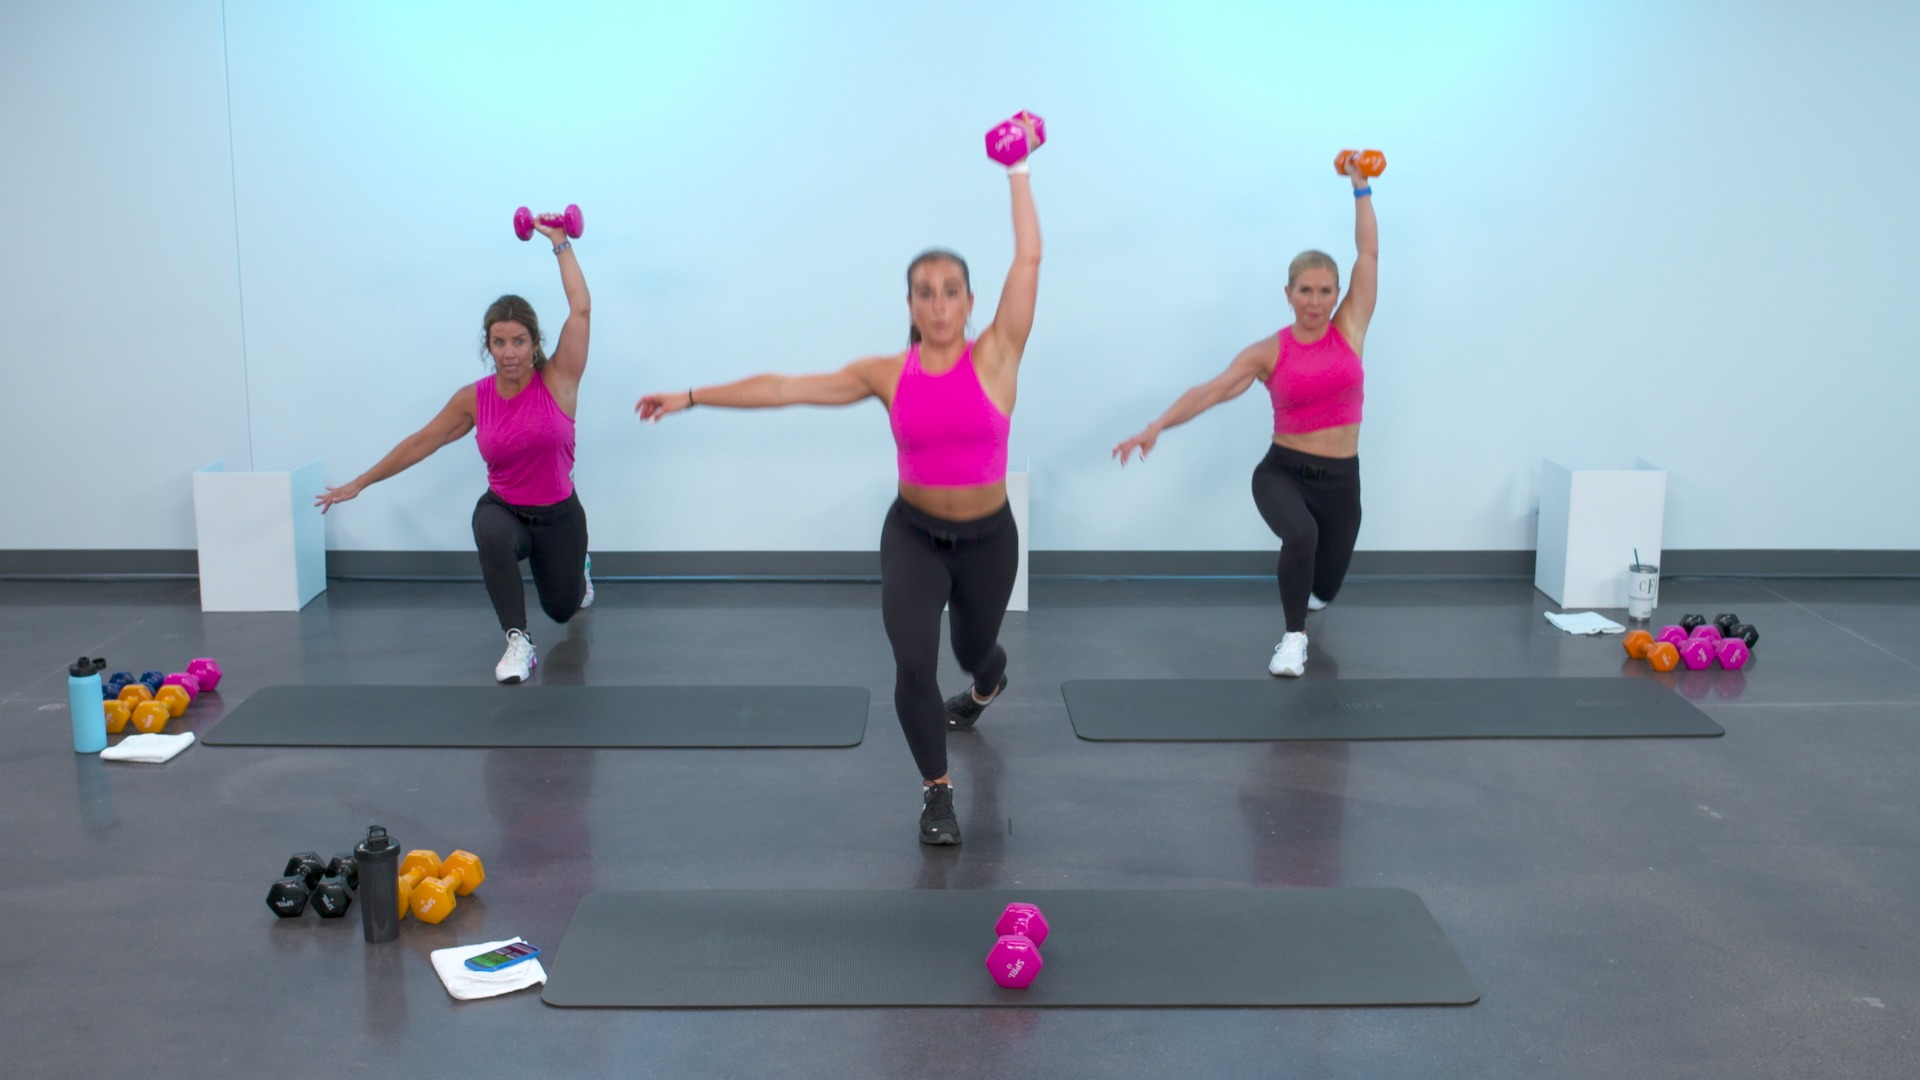 Three women wearing pink shirts working out with a dumbbell